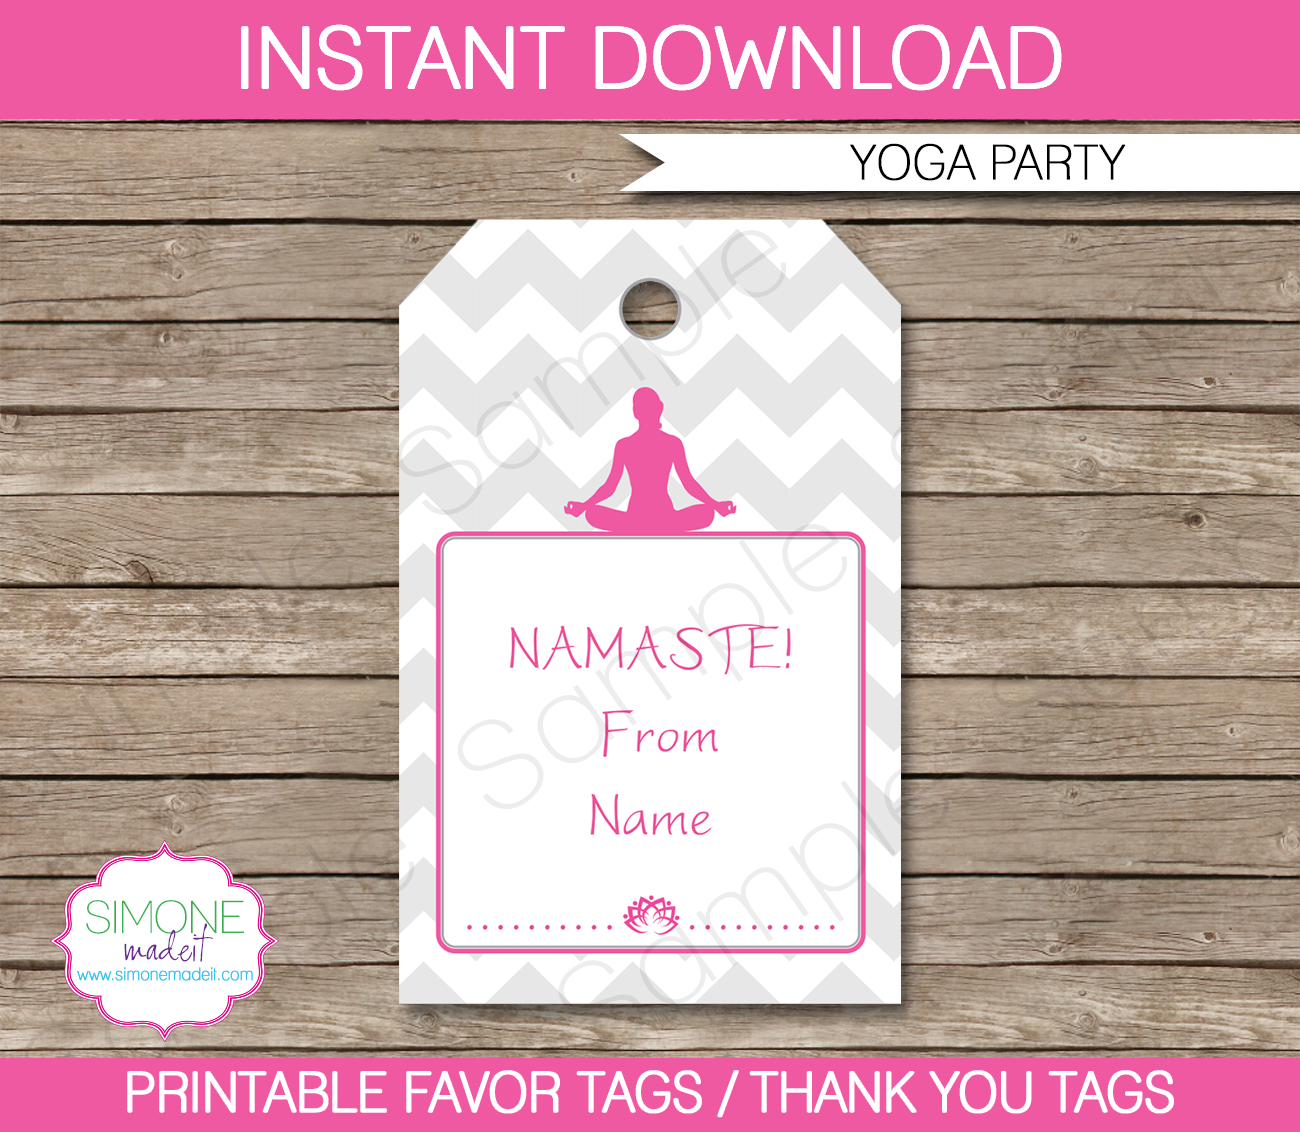 Yoga Party Favor Tags | Thank You Tags | Birthday Party | Editable DIY Template | $3.00 INSTANT DOWNLOAD via SIMONEmadeit.com